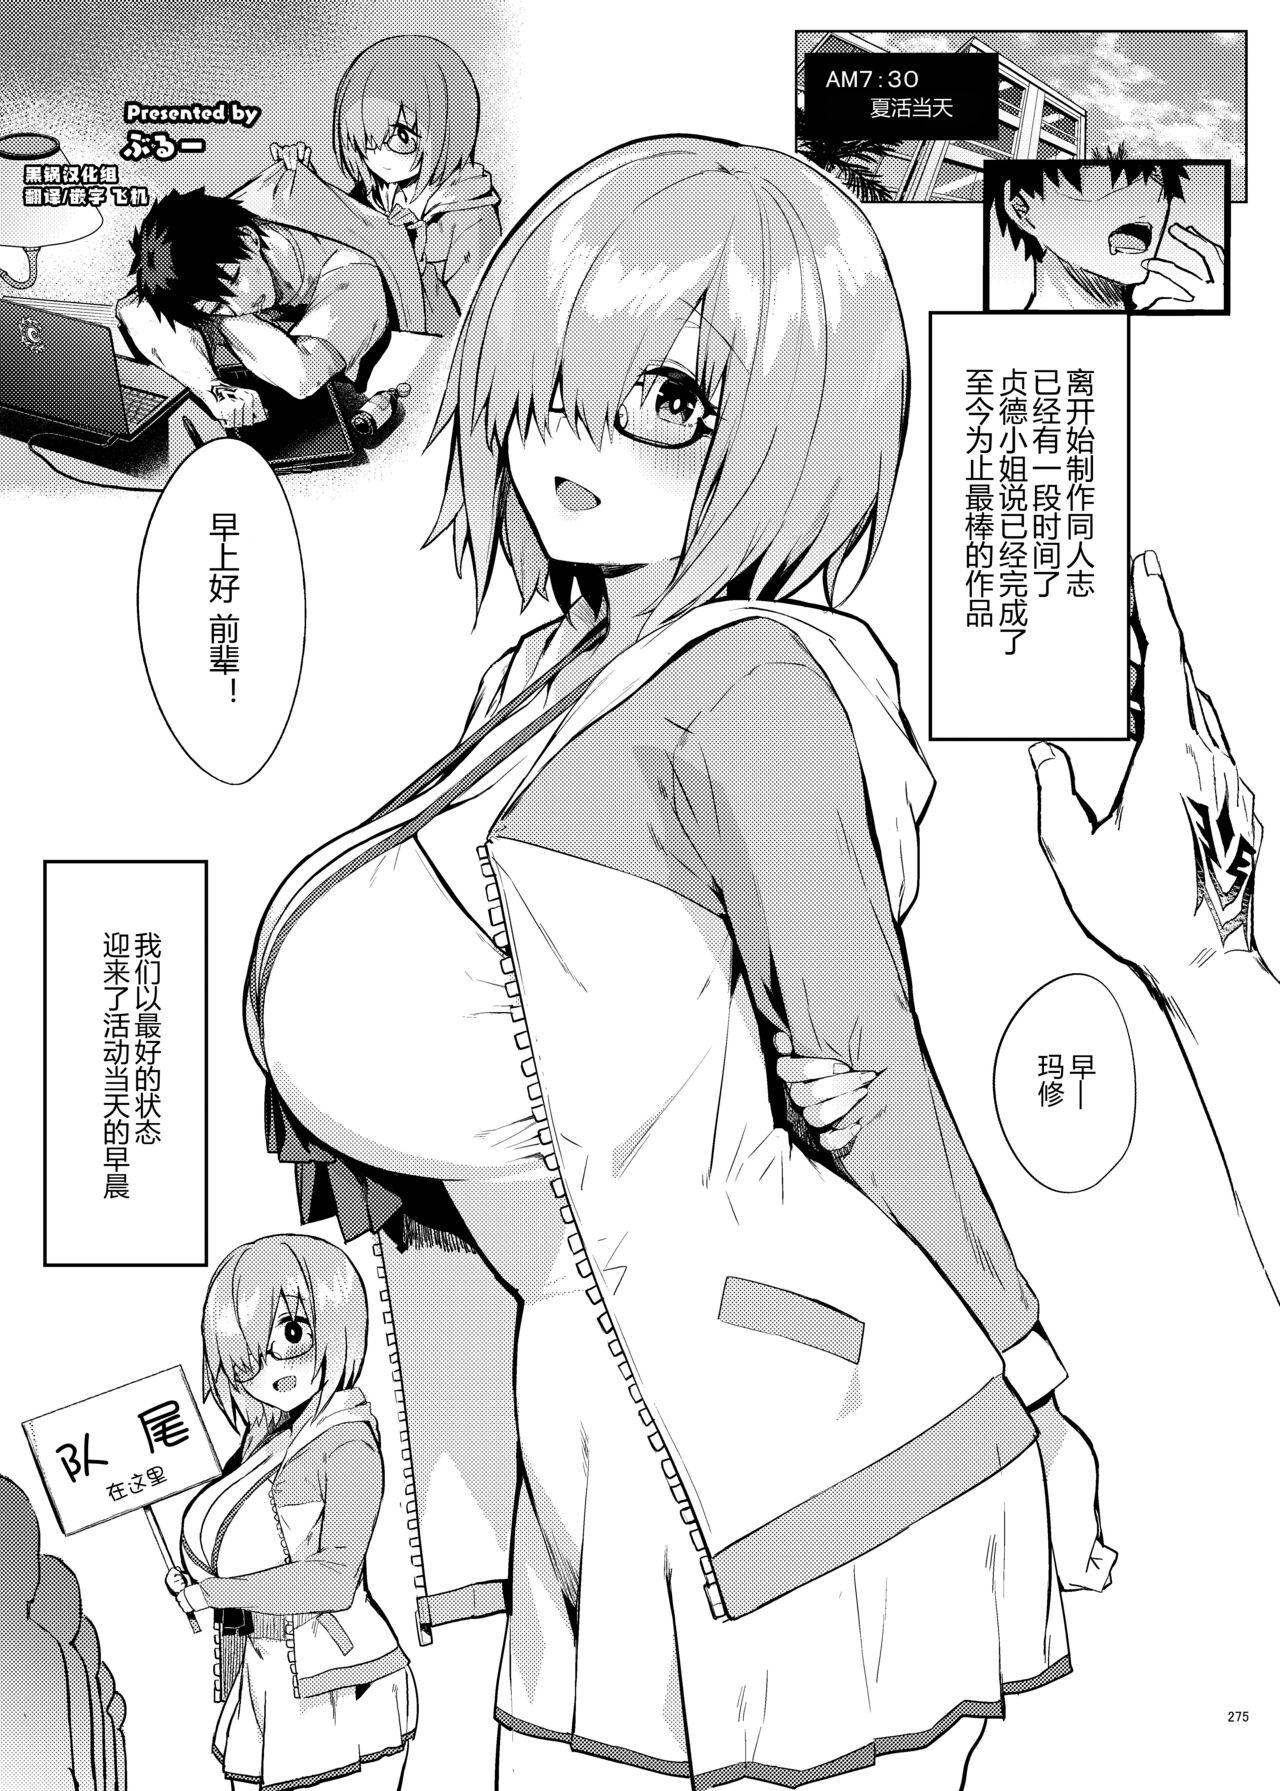 Sucking Dicks Mash - Fate grand order Chastity - Page 1